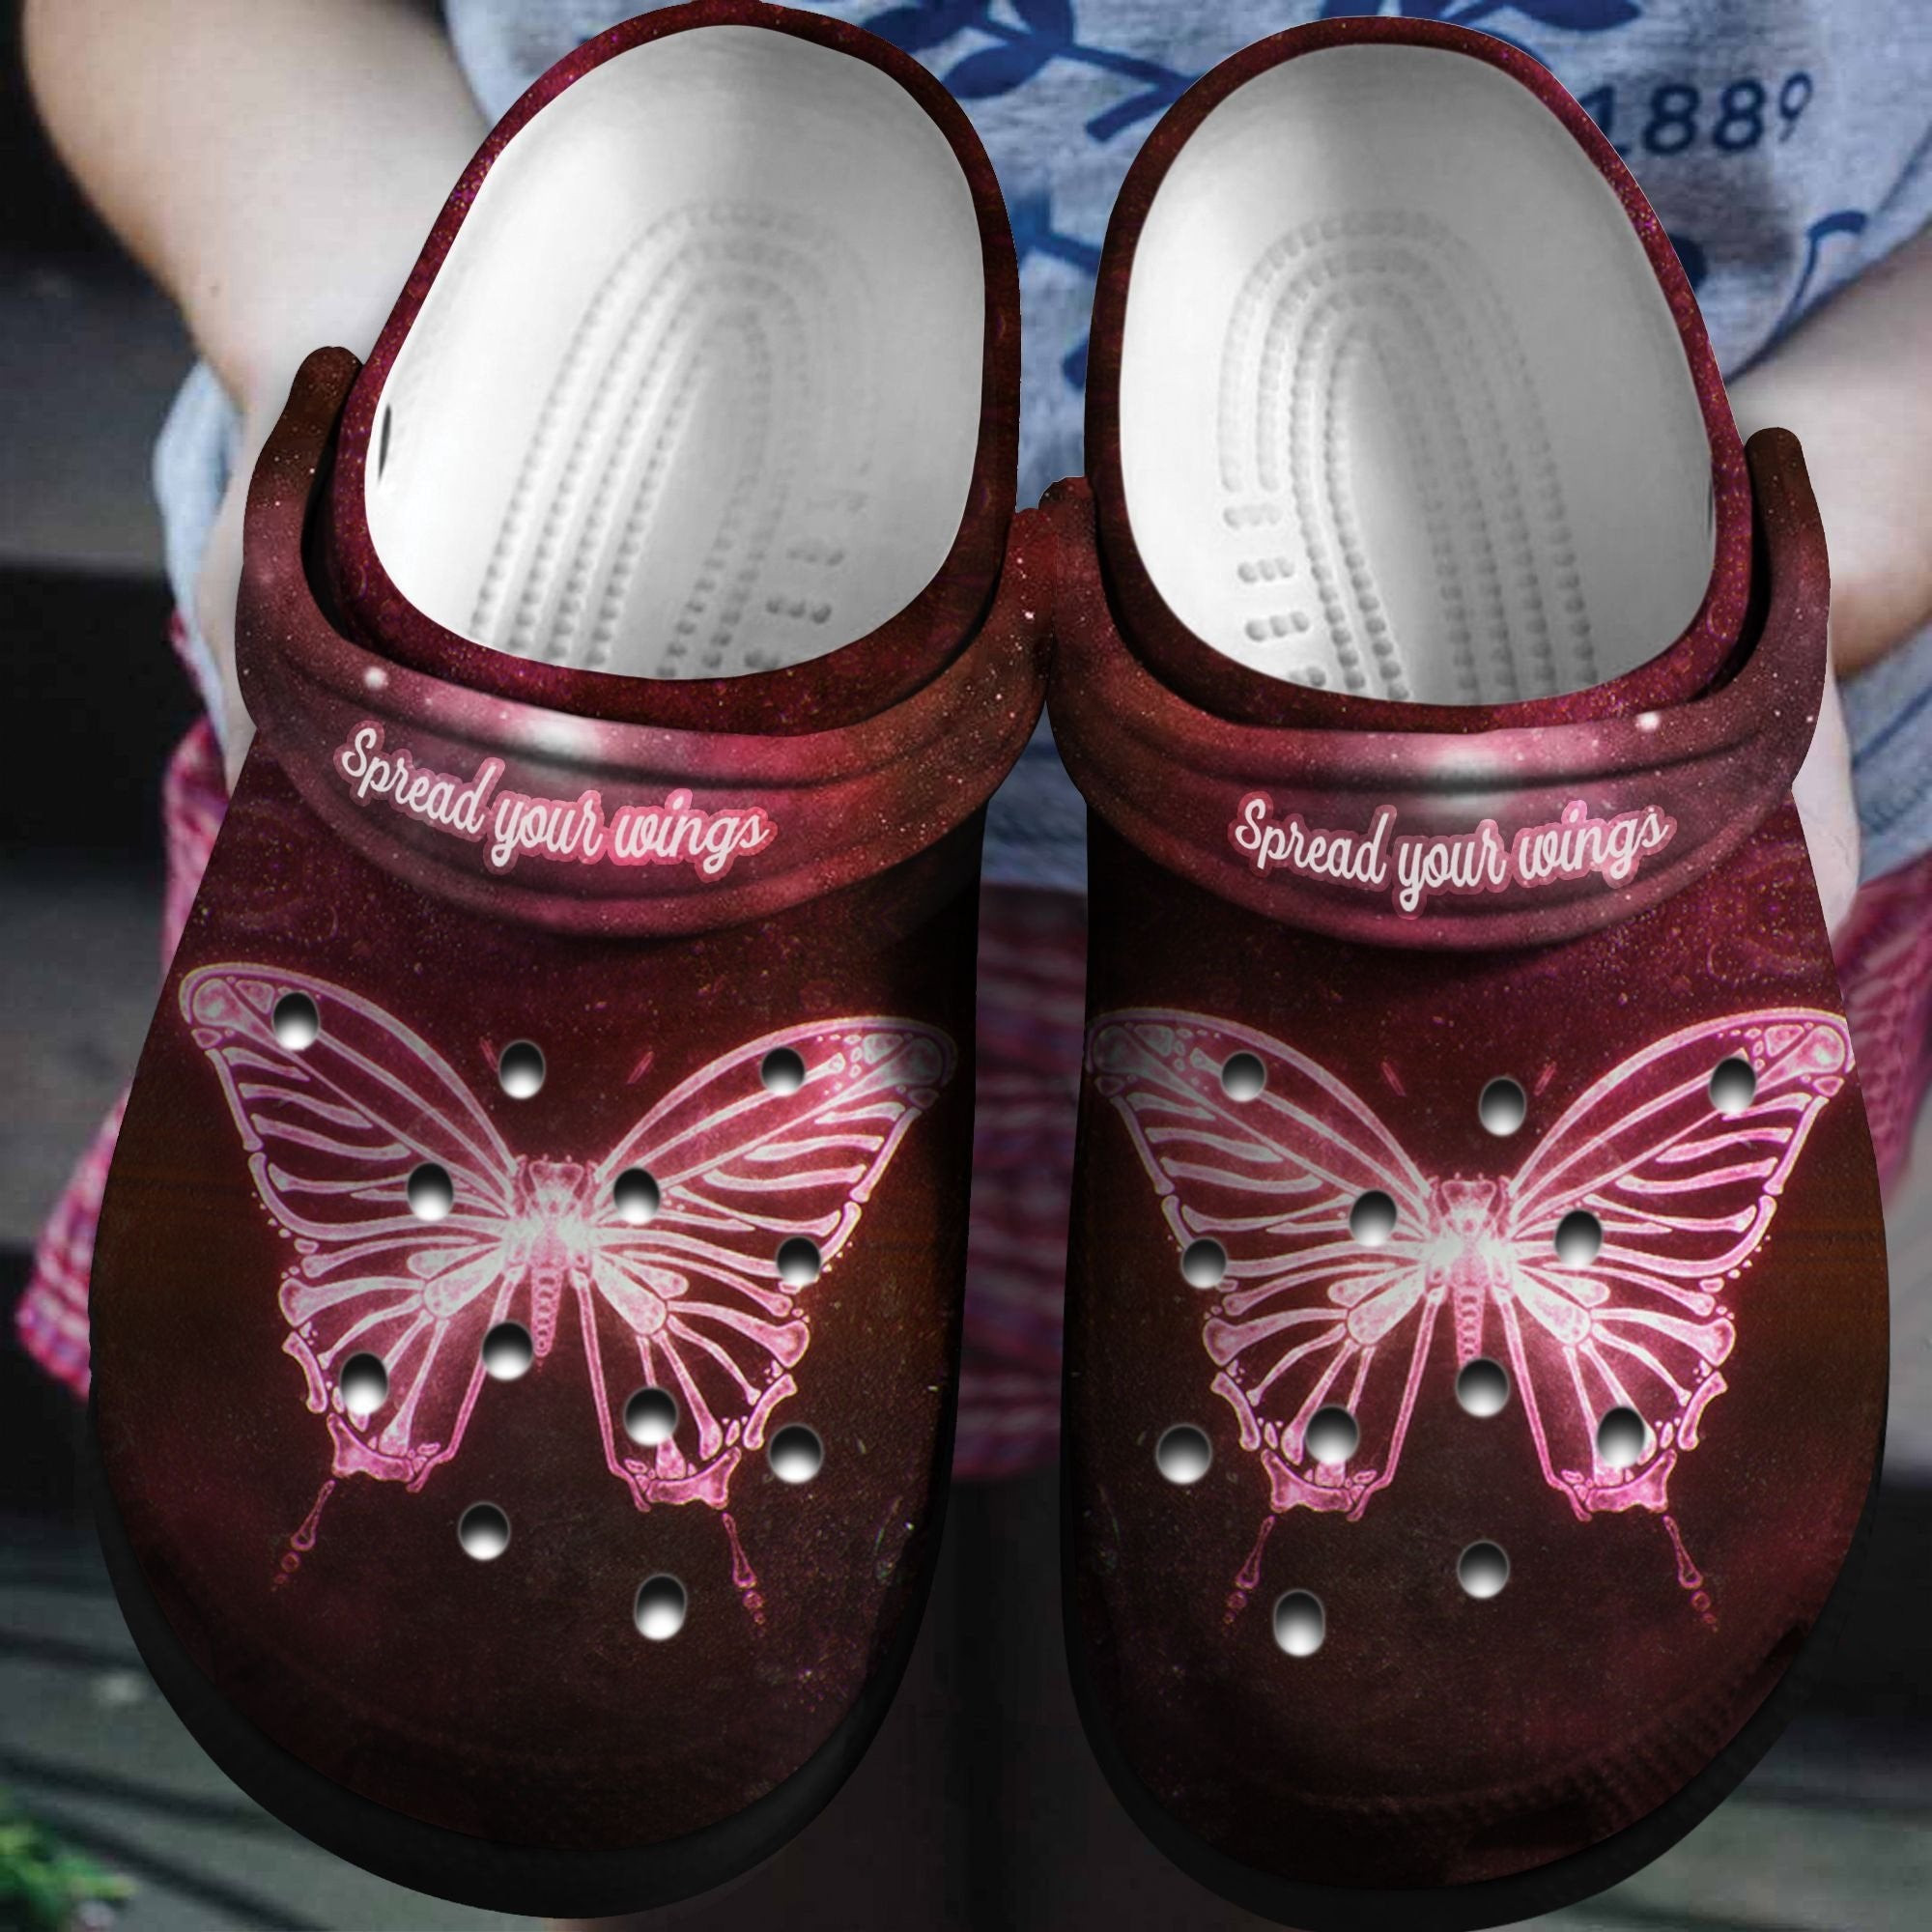 Spread Your Wings Shoes - Magical Butterfly Crocs Clogs Birthday Gift